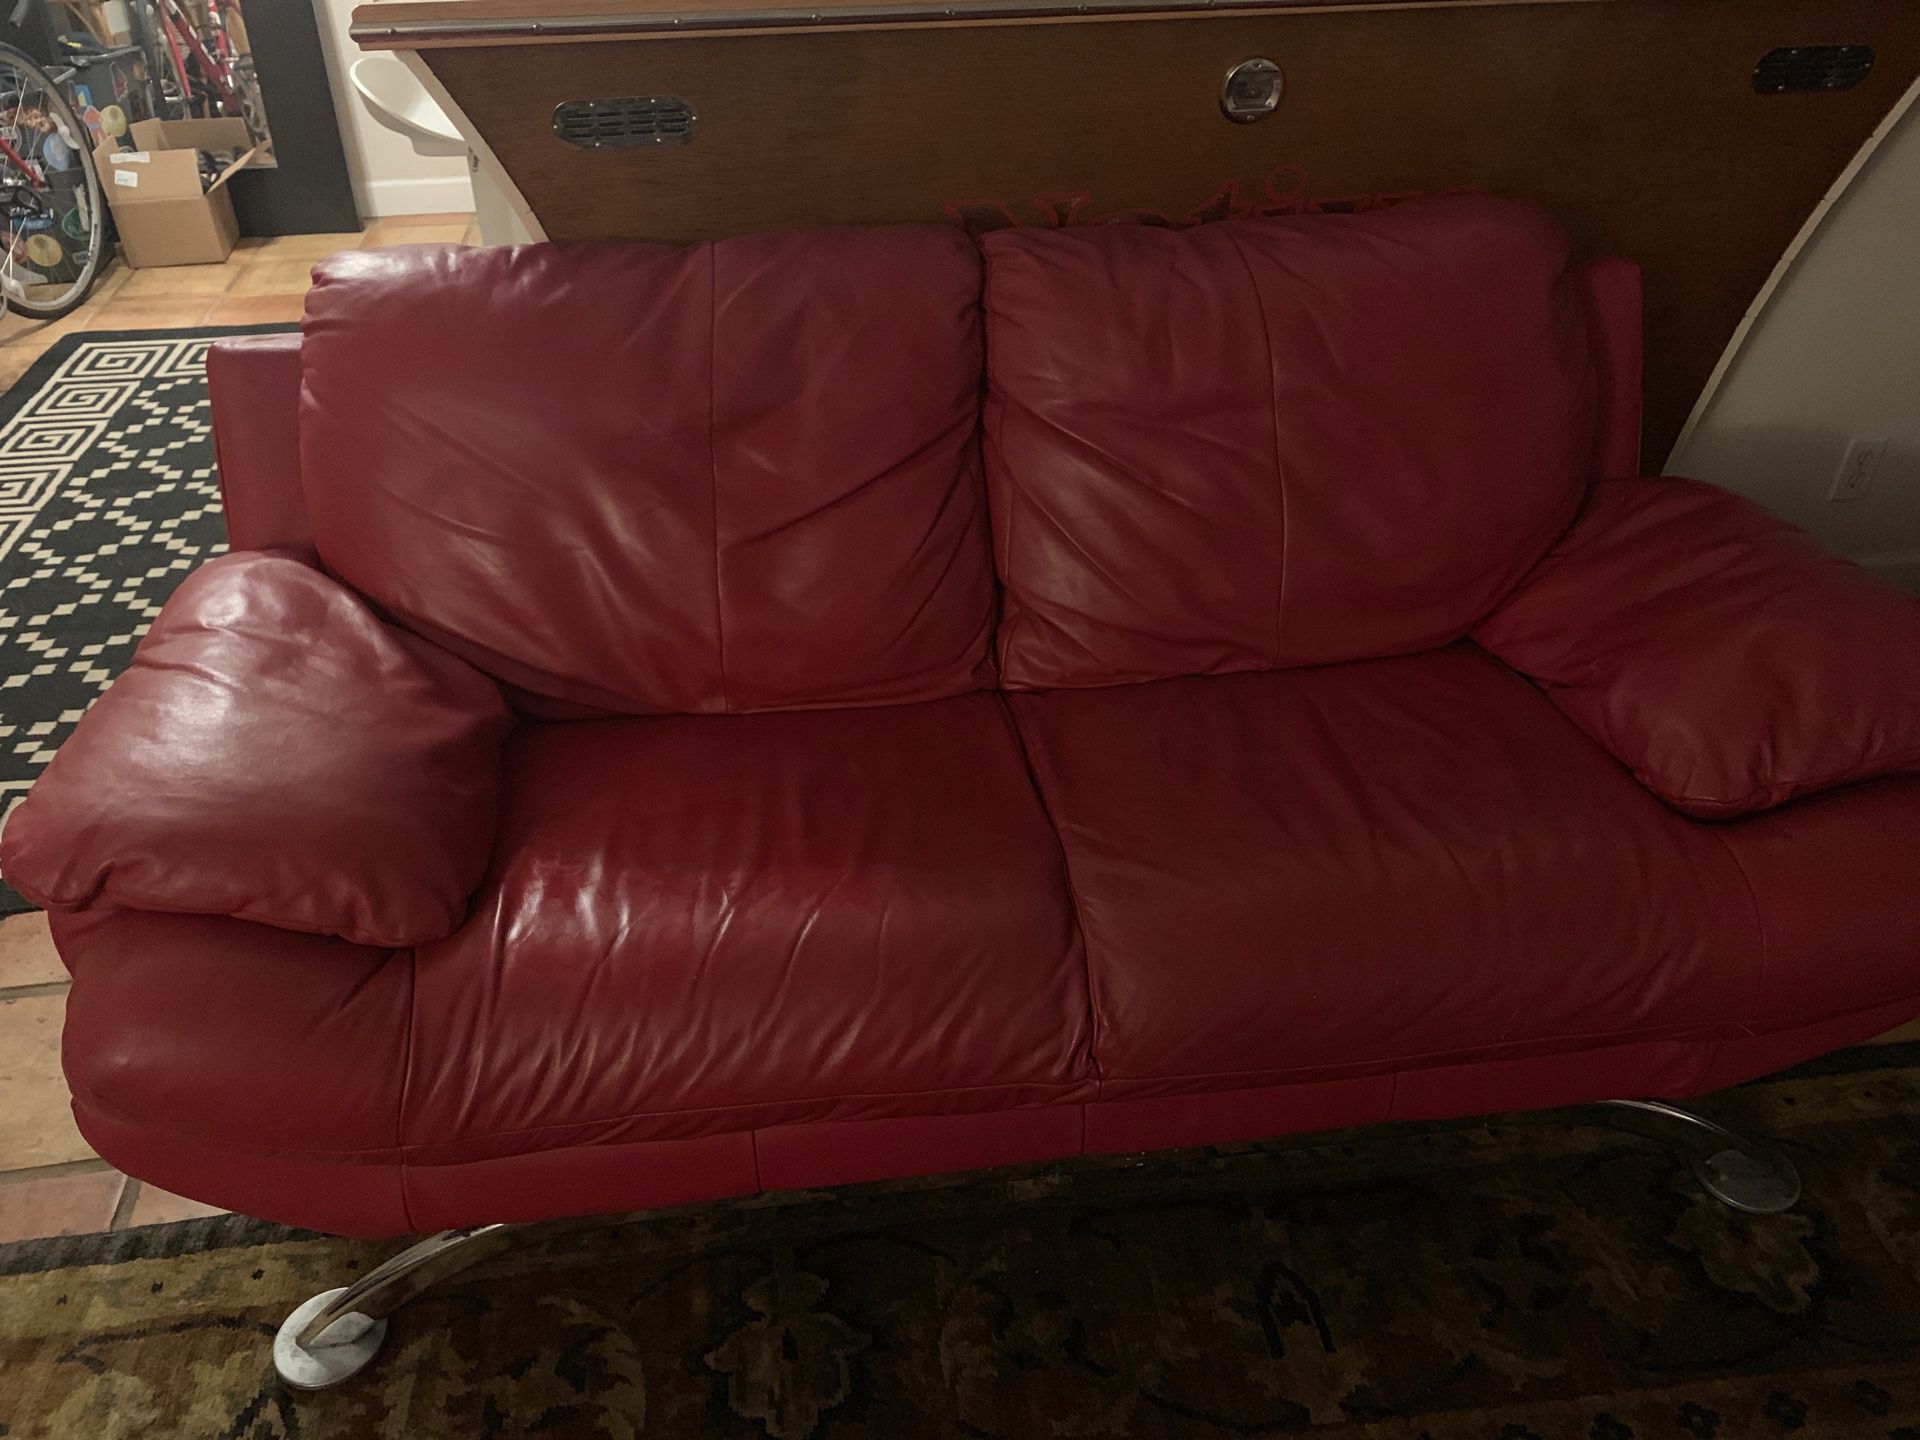 Comfortable red leather couch